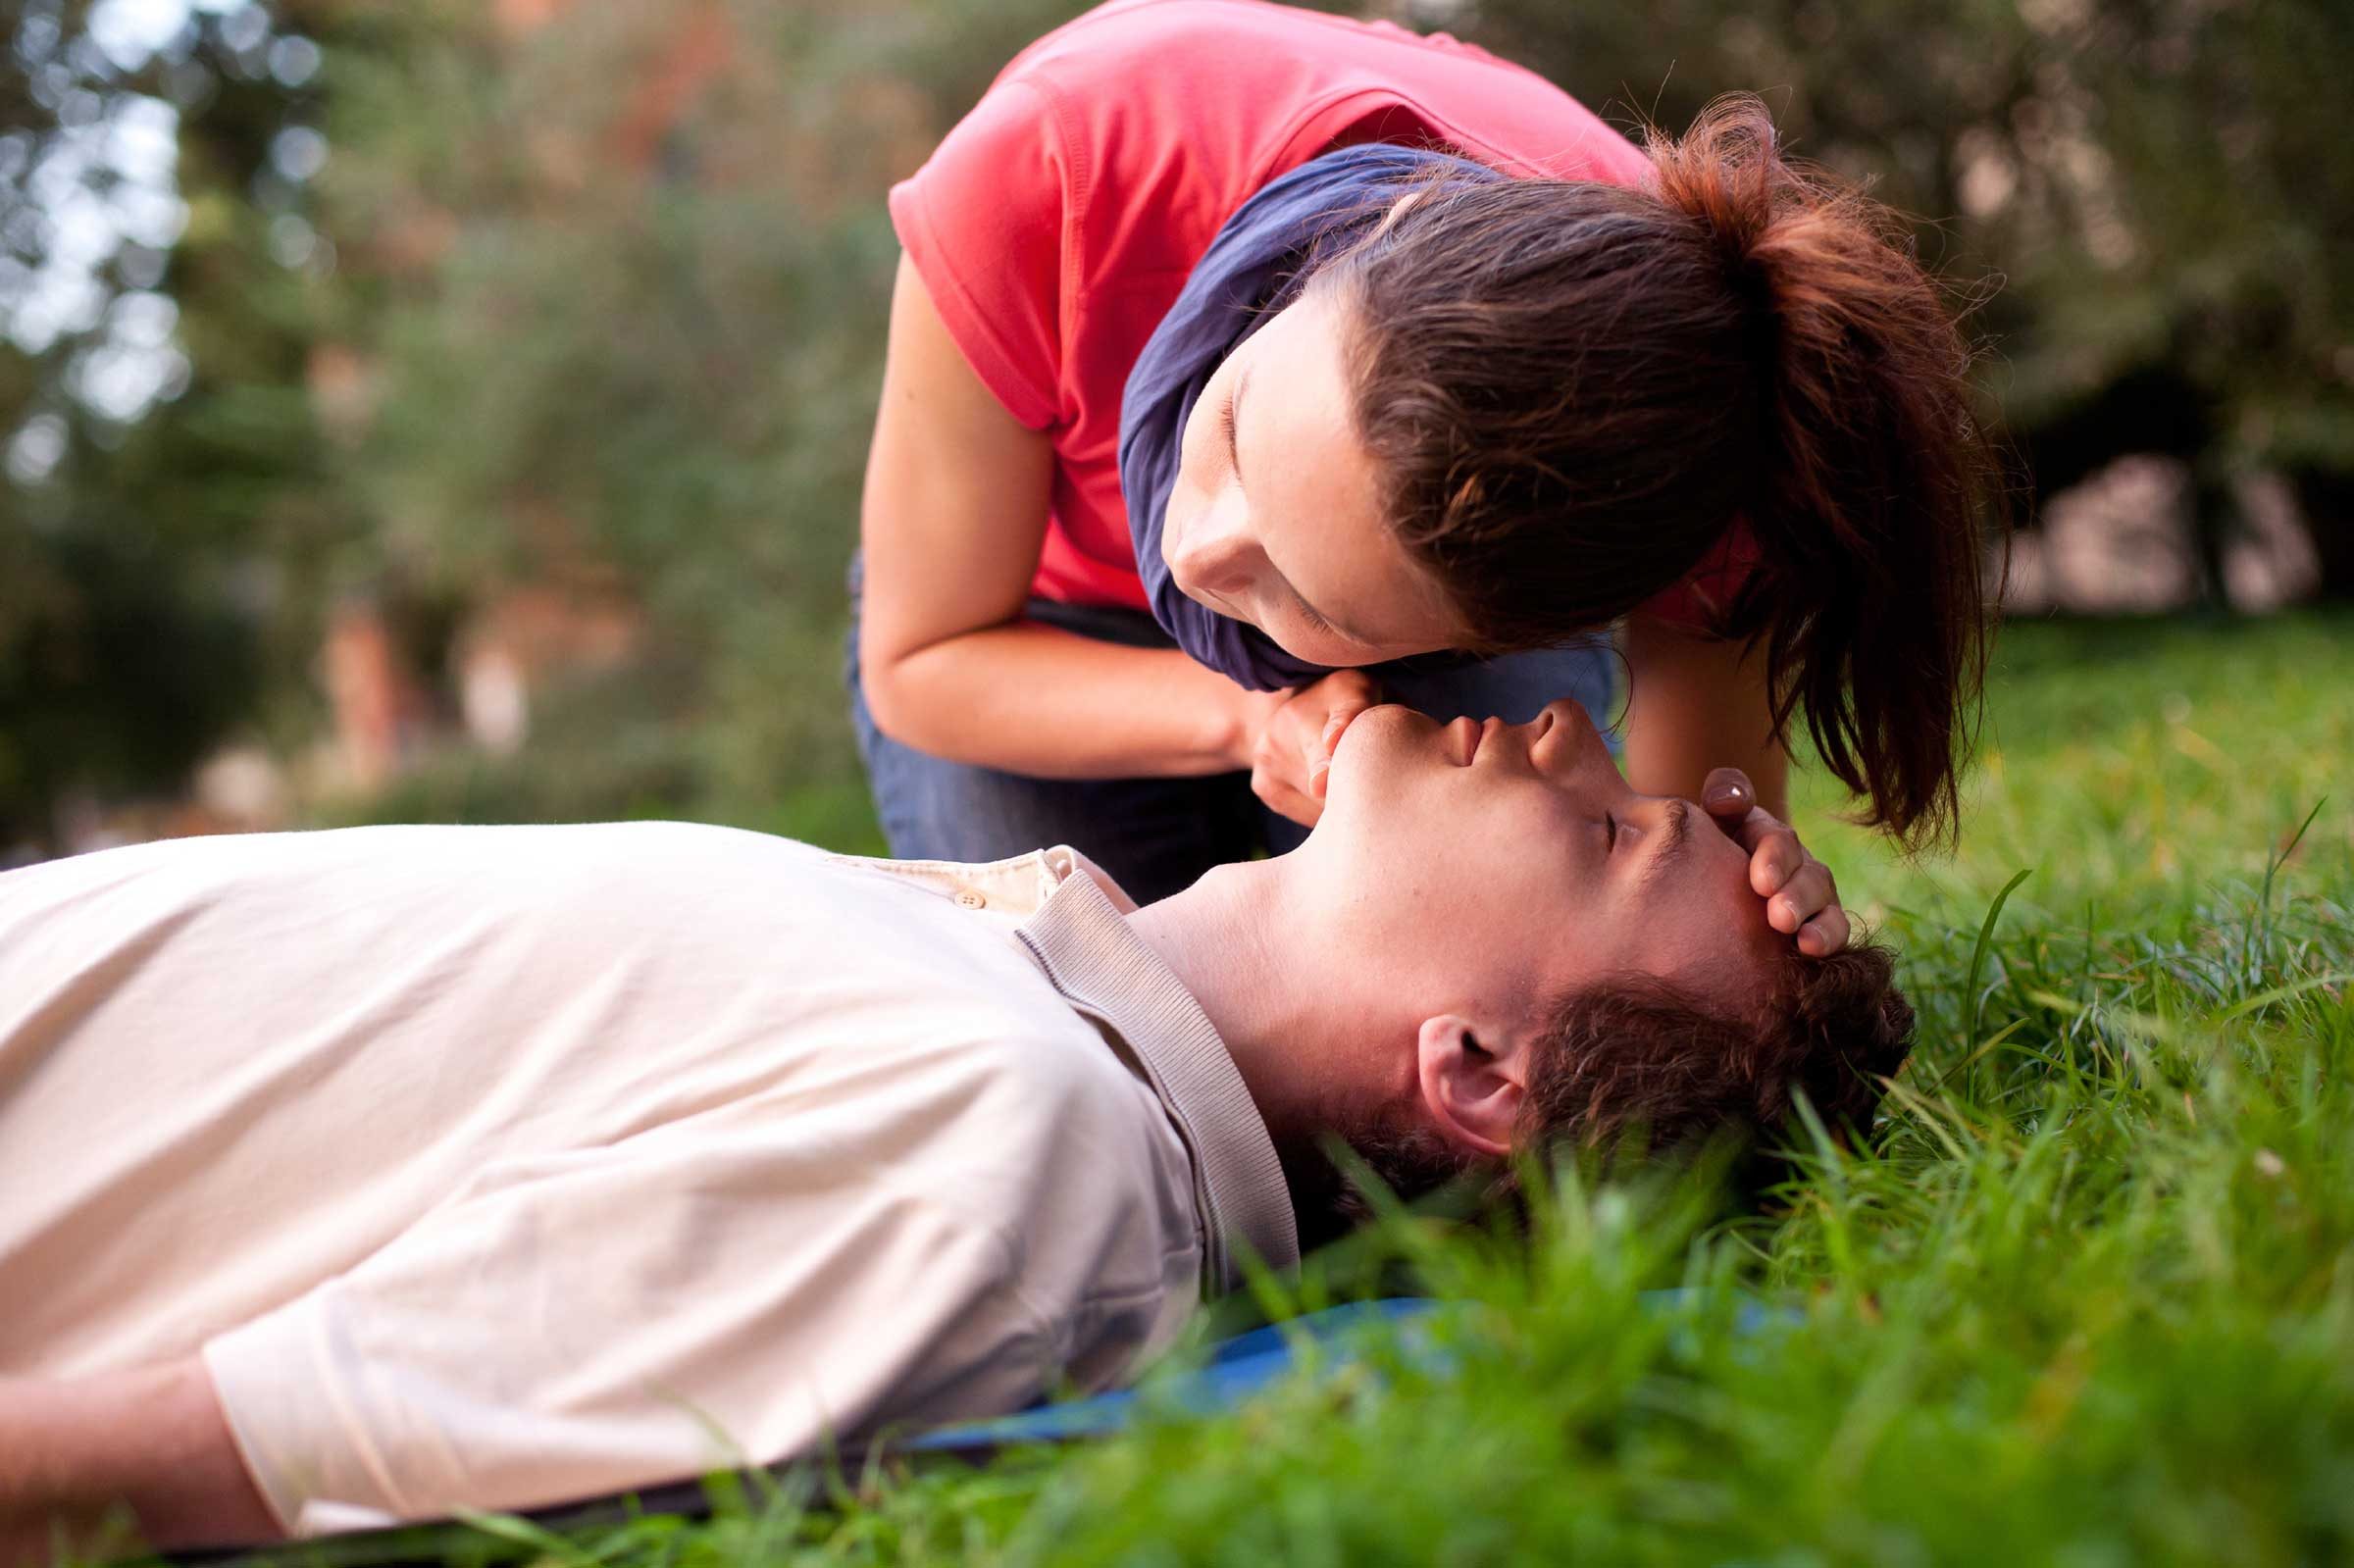 7 CPR Steps Everyone Should Know